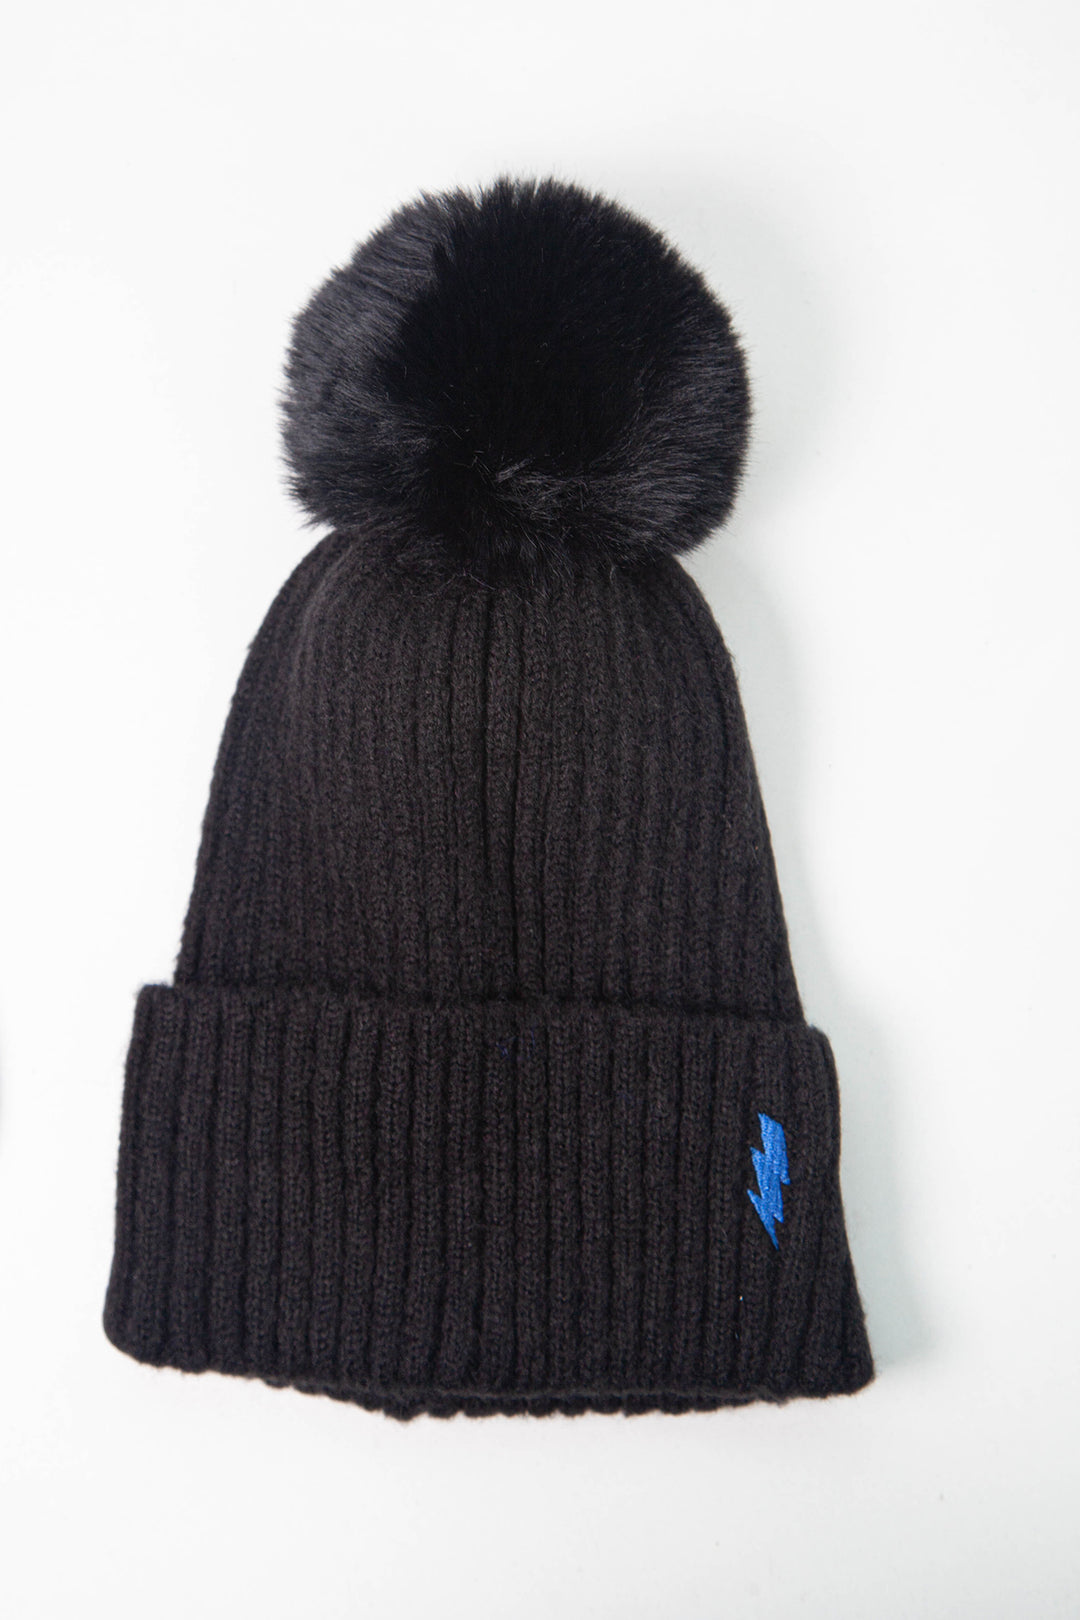 black ribbed beanie hat with a pom pom on top and a blue embroidered lightning bolt motif on the cuff of the hat